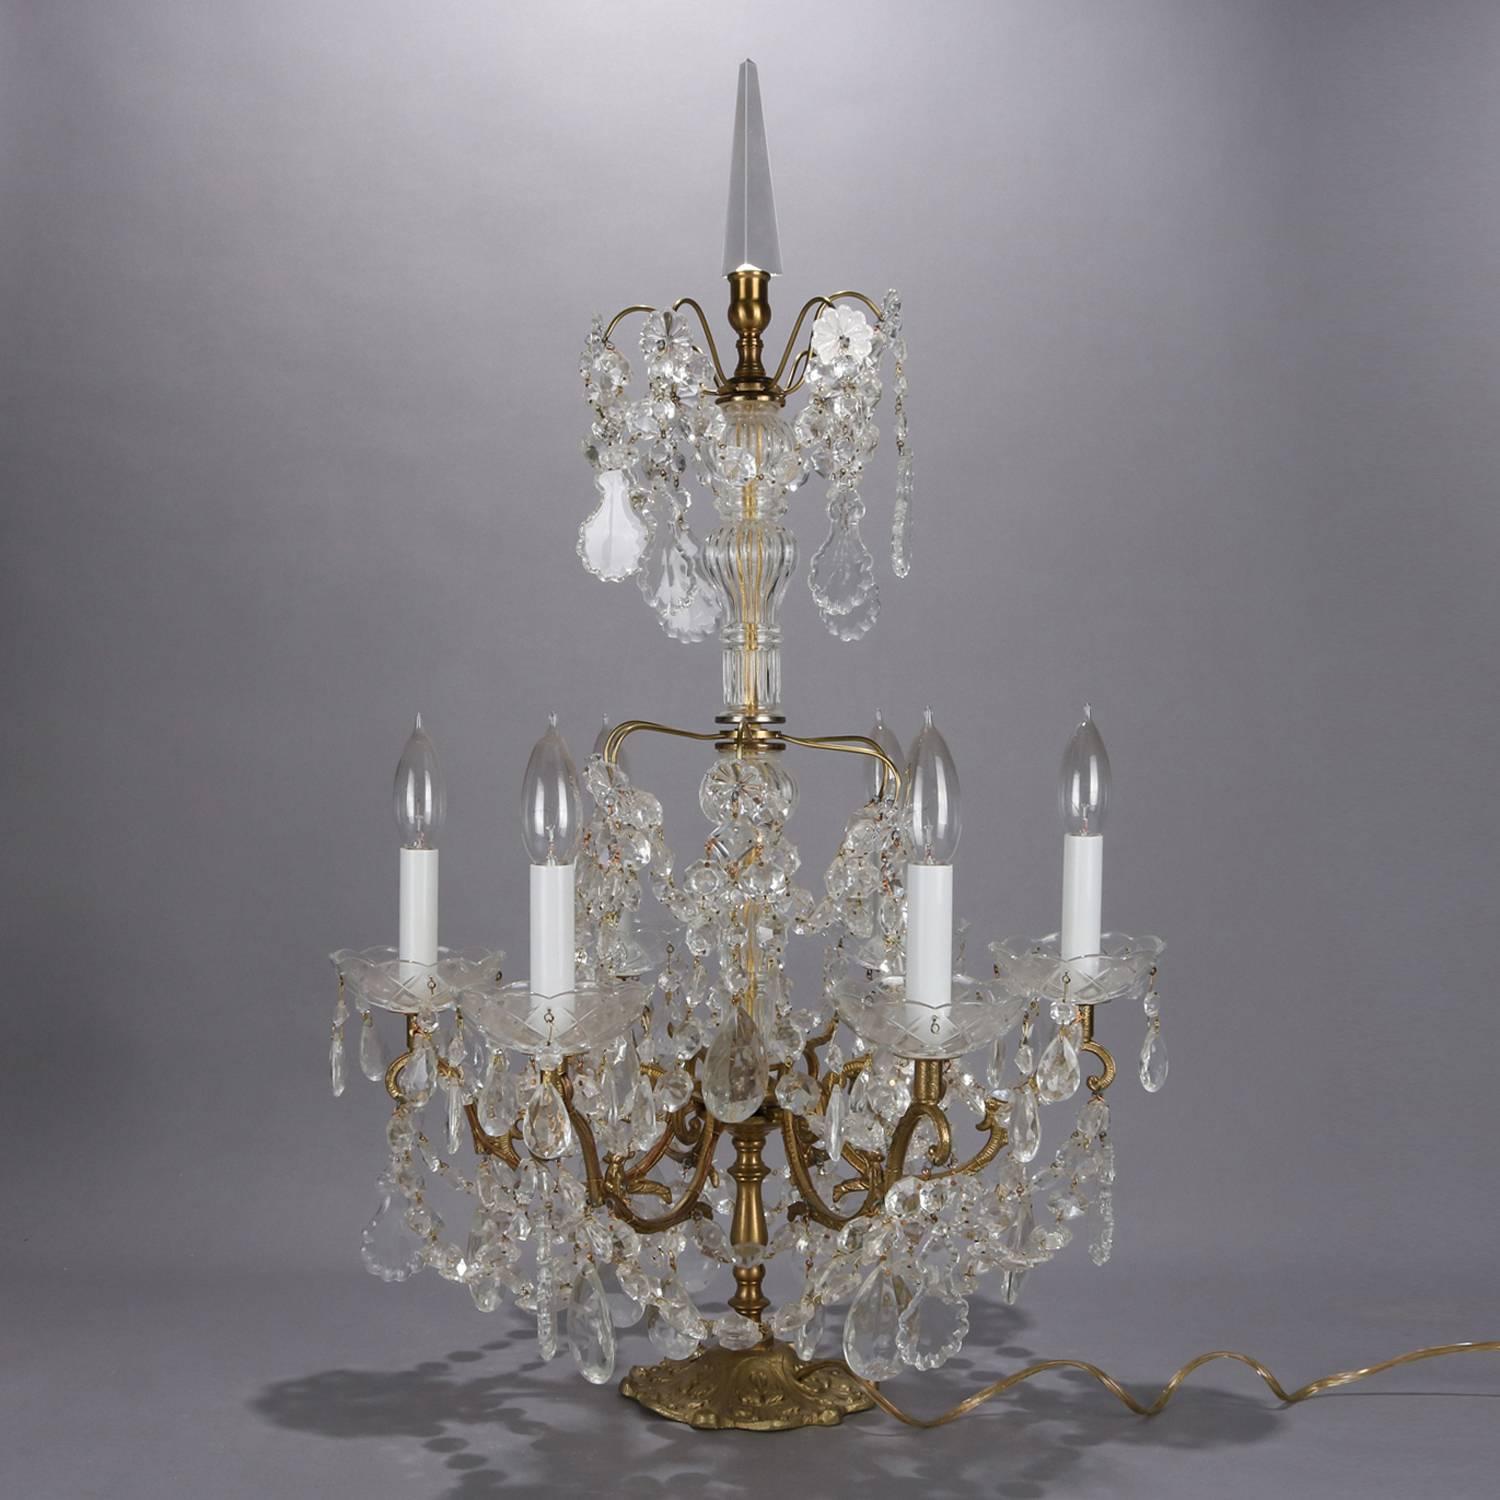 Pair of Italian branch table chandeliers feature scroll and foliate form gilt metal bases each with six candle lights, strung bead and rock crystals throughout, circa 1900

Measures: 30